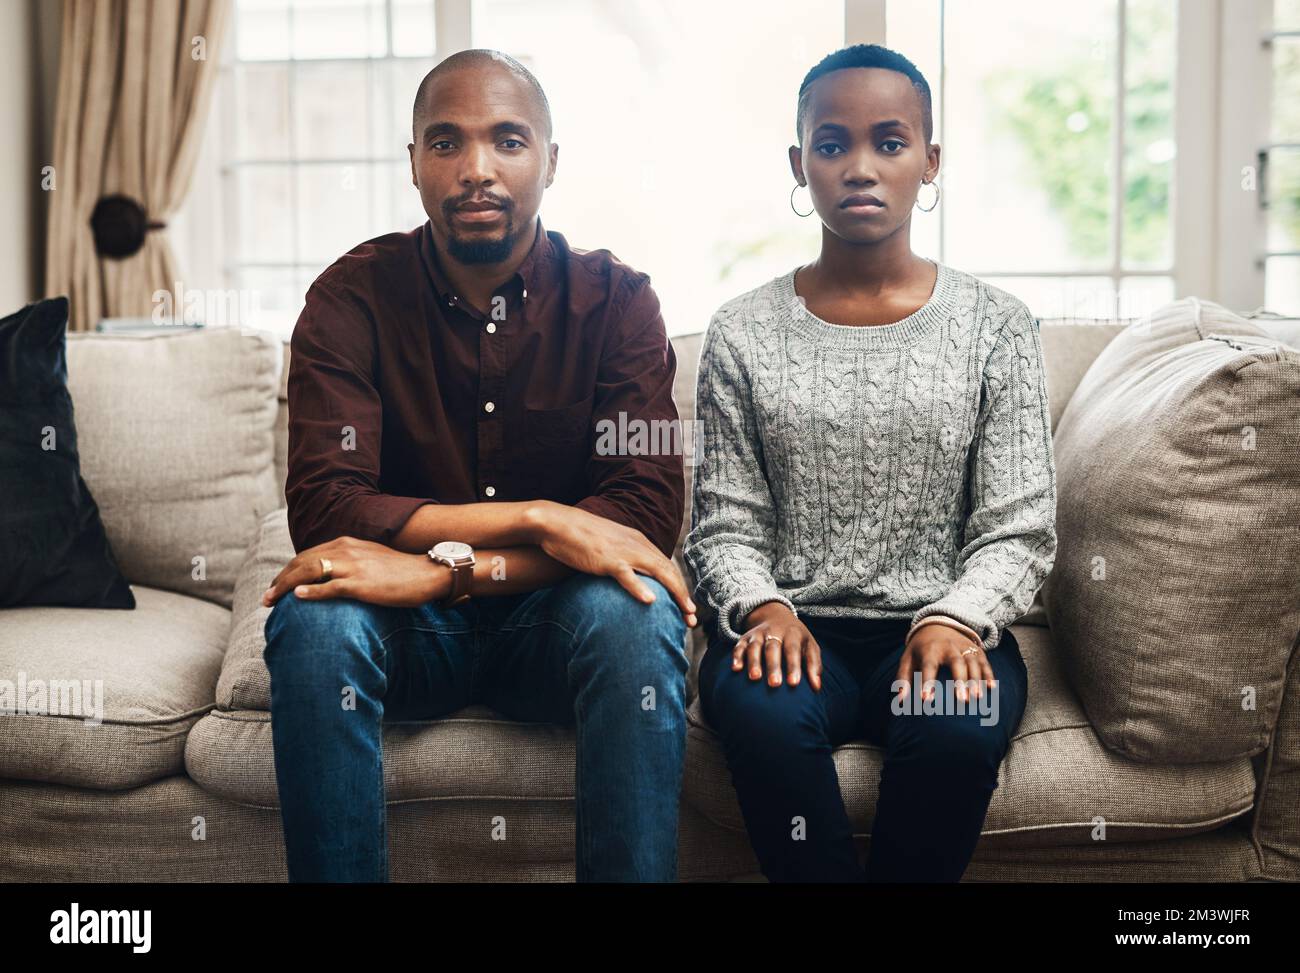 Were bold and unapologetic about our love. Portrait of a young couple looking serious and sitting alongside each other on a sofa at home. Stock Photo